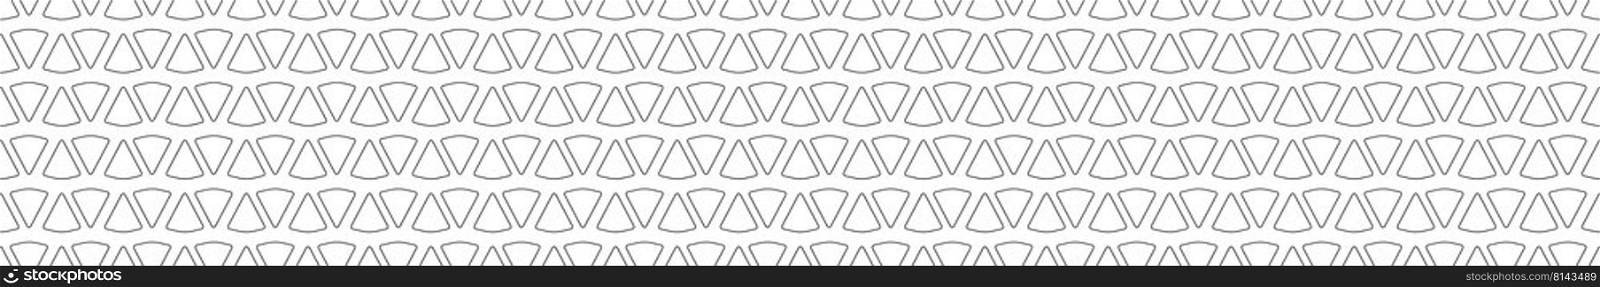 set of seamless patterns of free-form shapes for texture, textiles, simple backgrounds and creative design